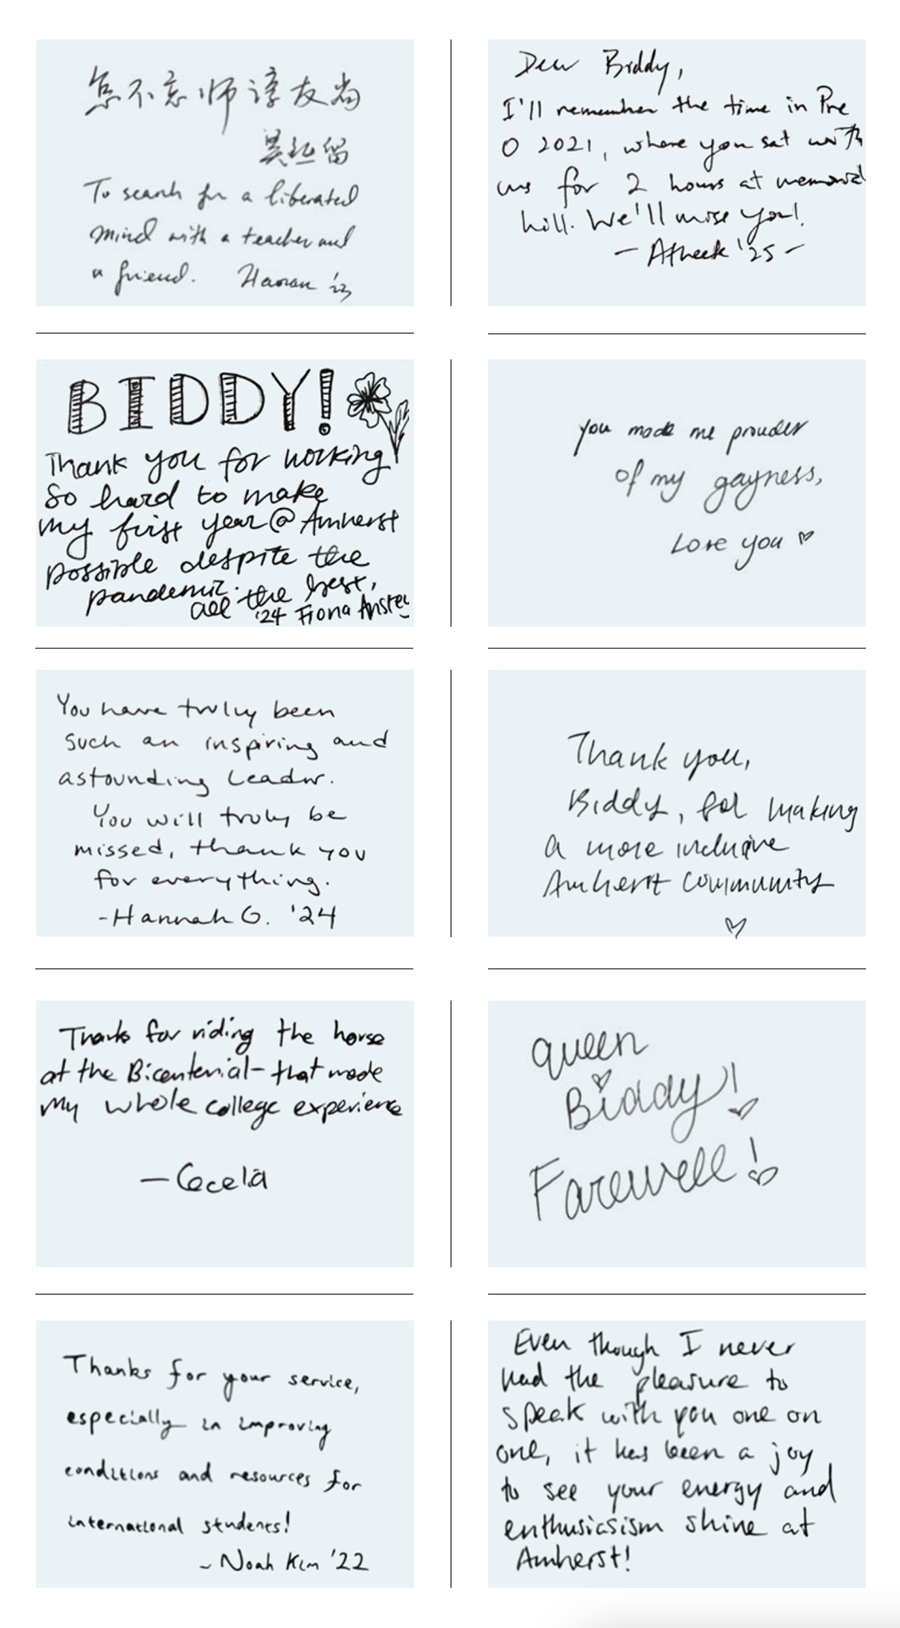 A series of ten handwritten notes in 5 two by two rows